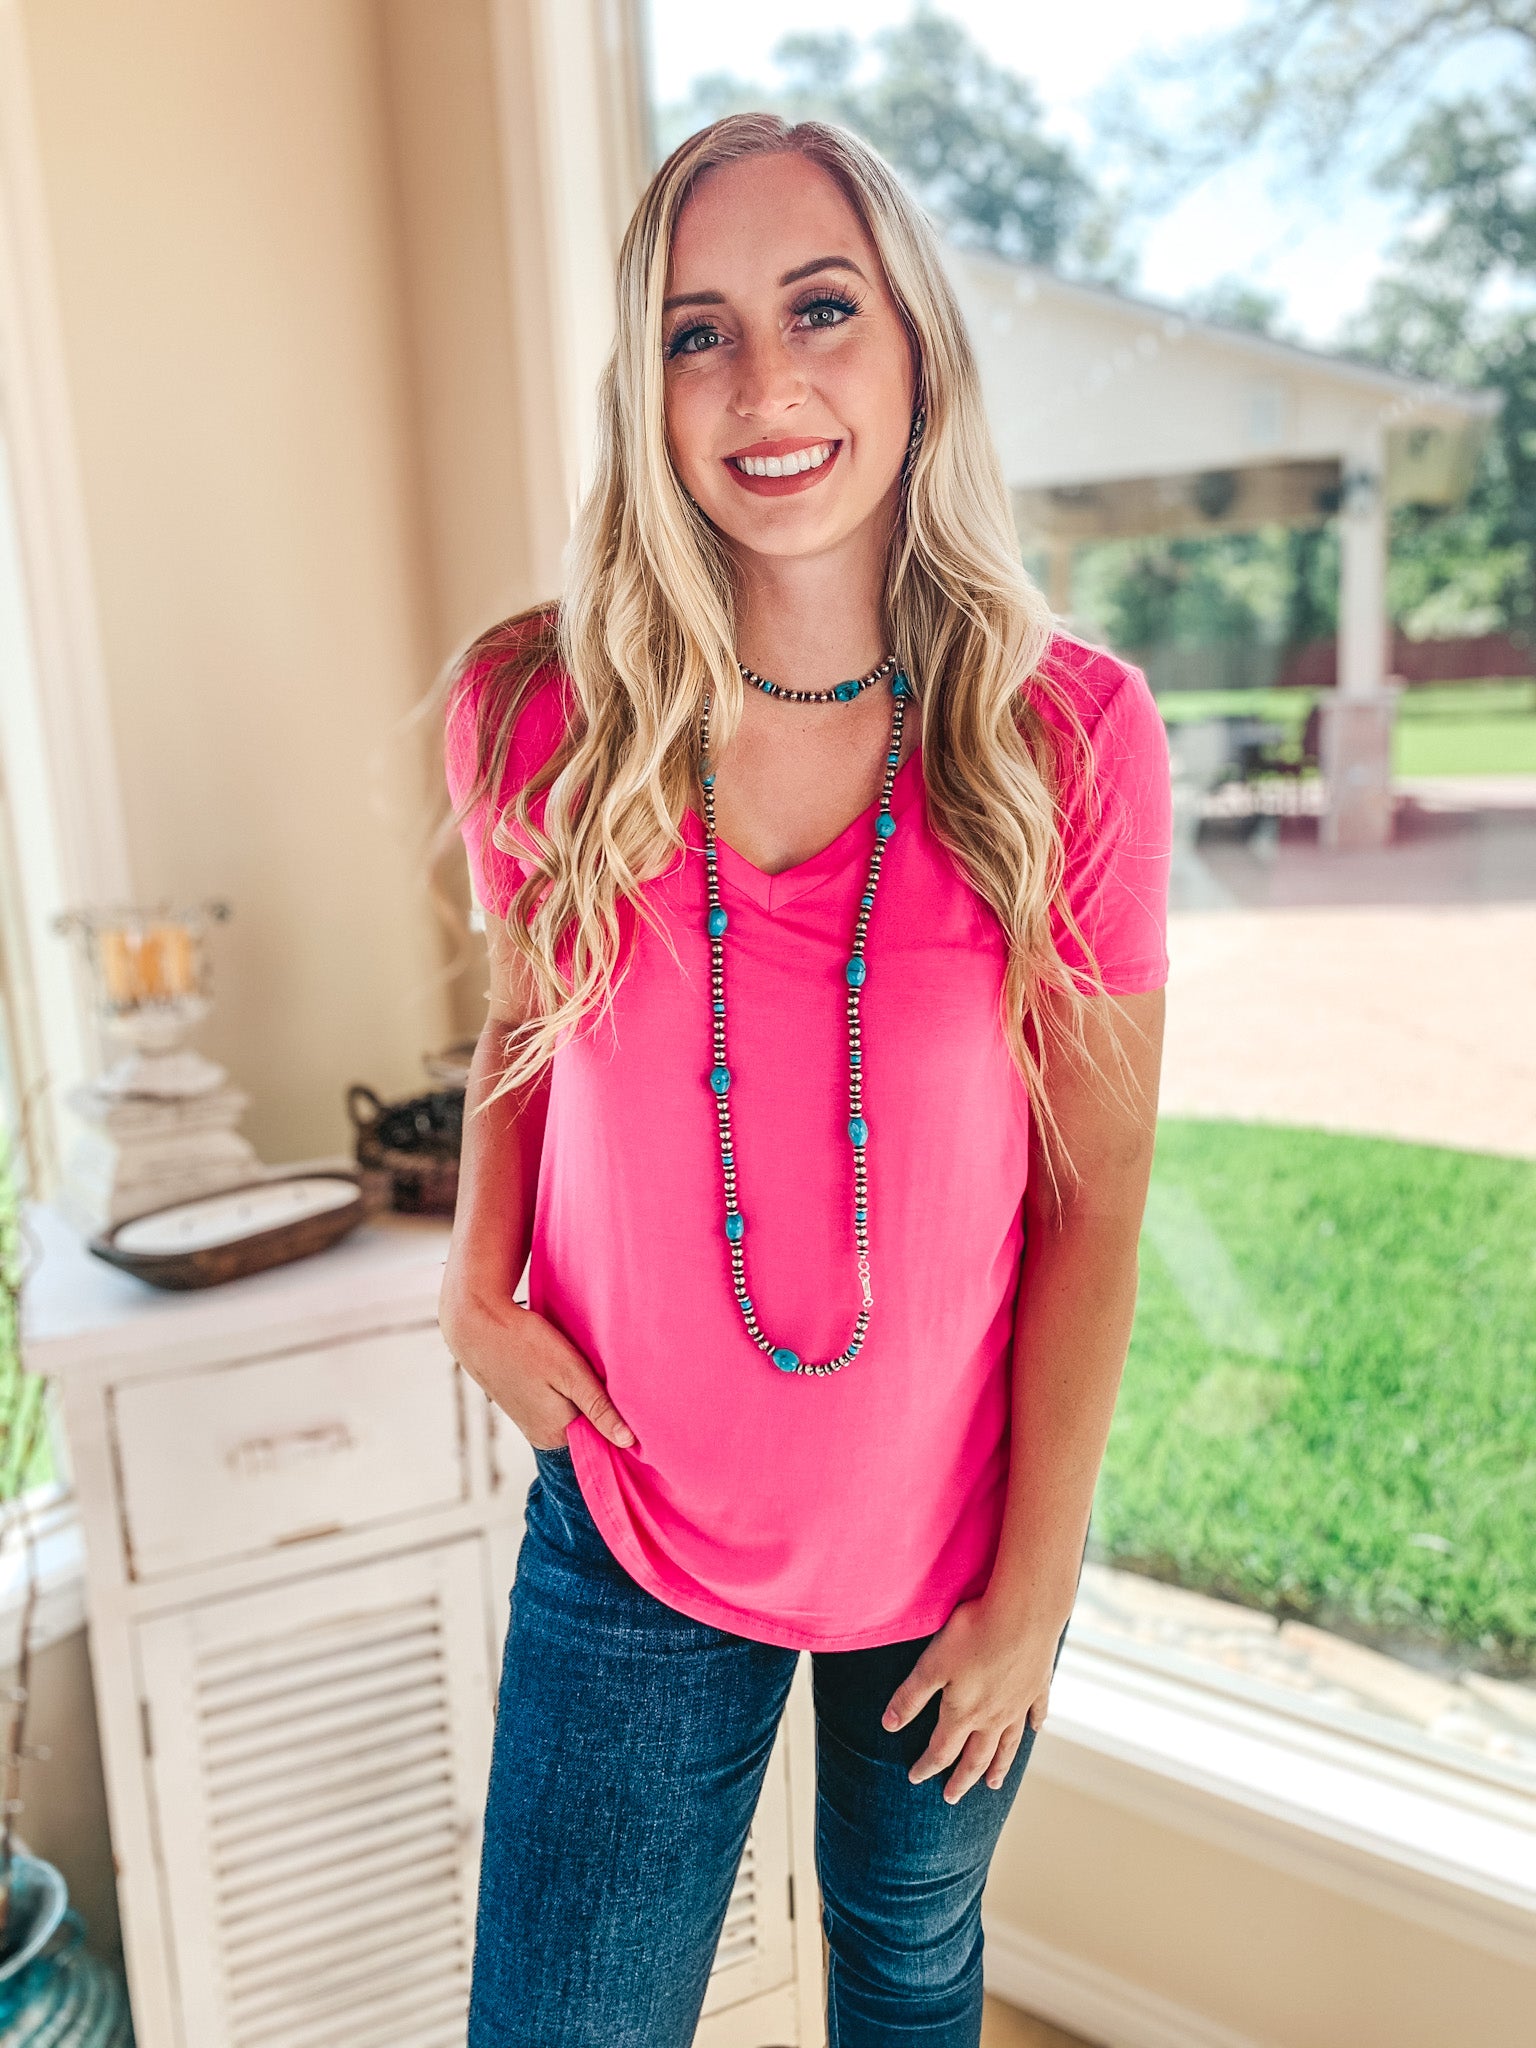 Simply The Best V Neck Short Sleeve Tee Shirt in Hot Pink - Giddy Up Glamour Boutique